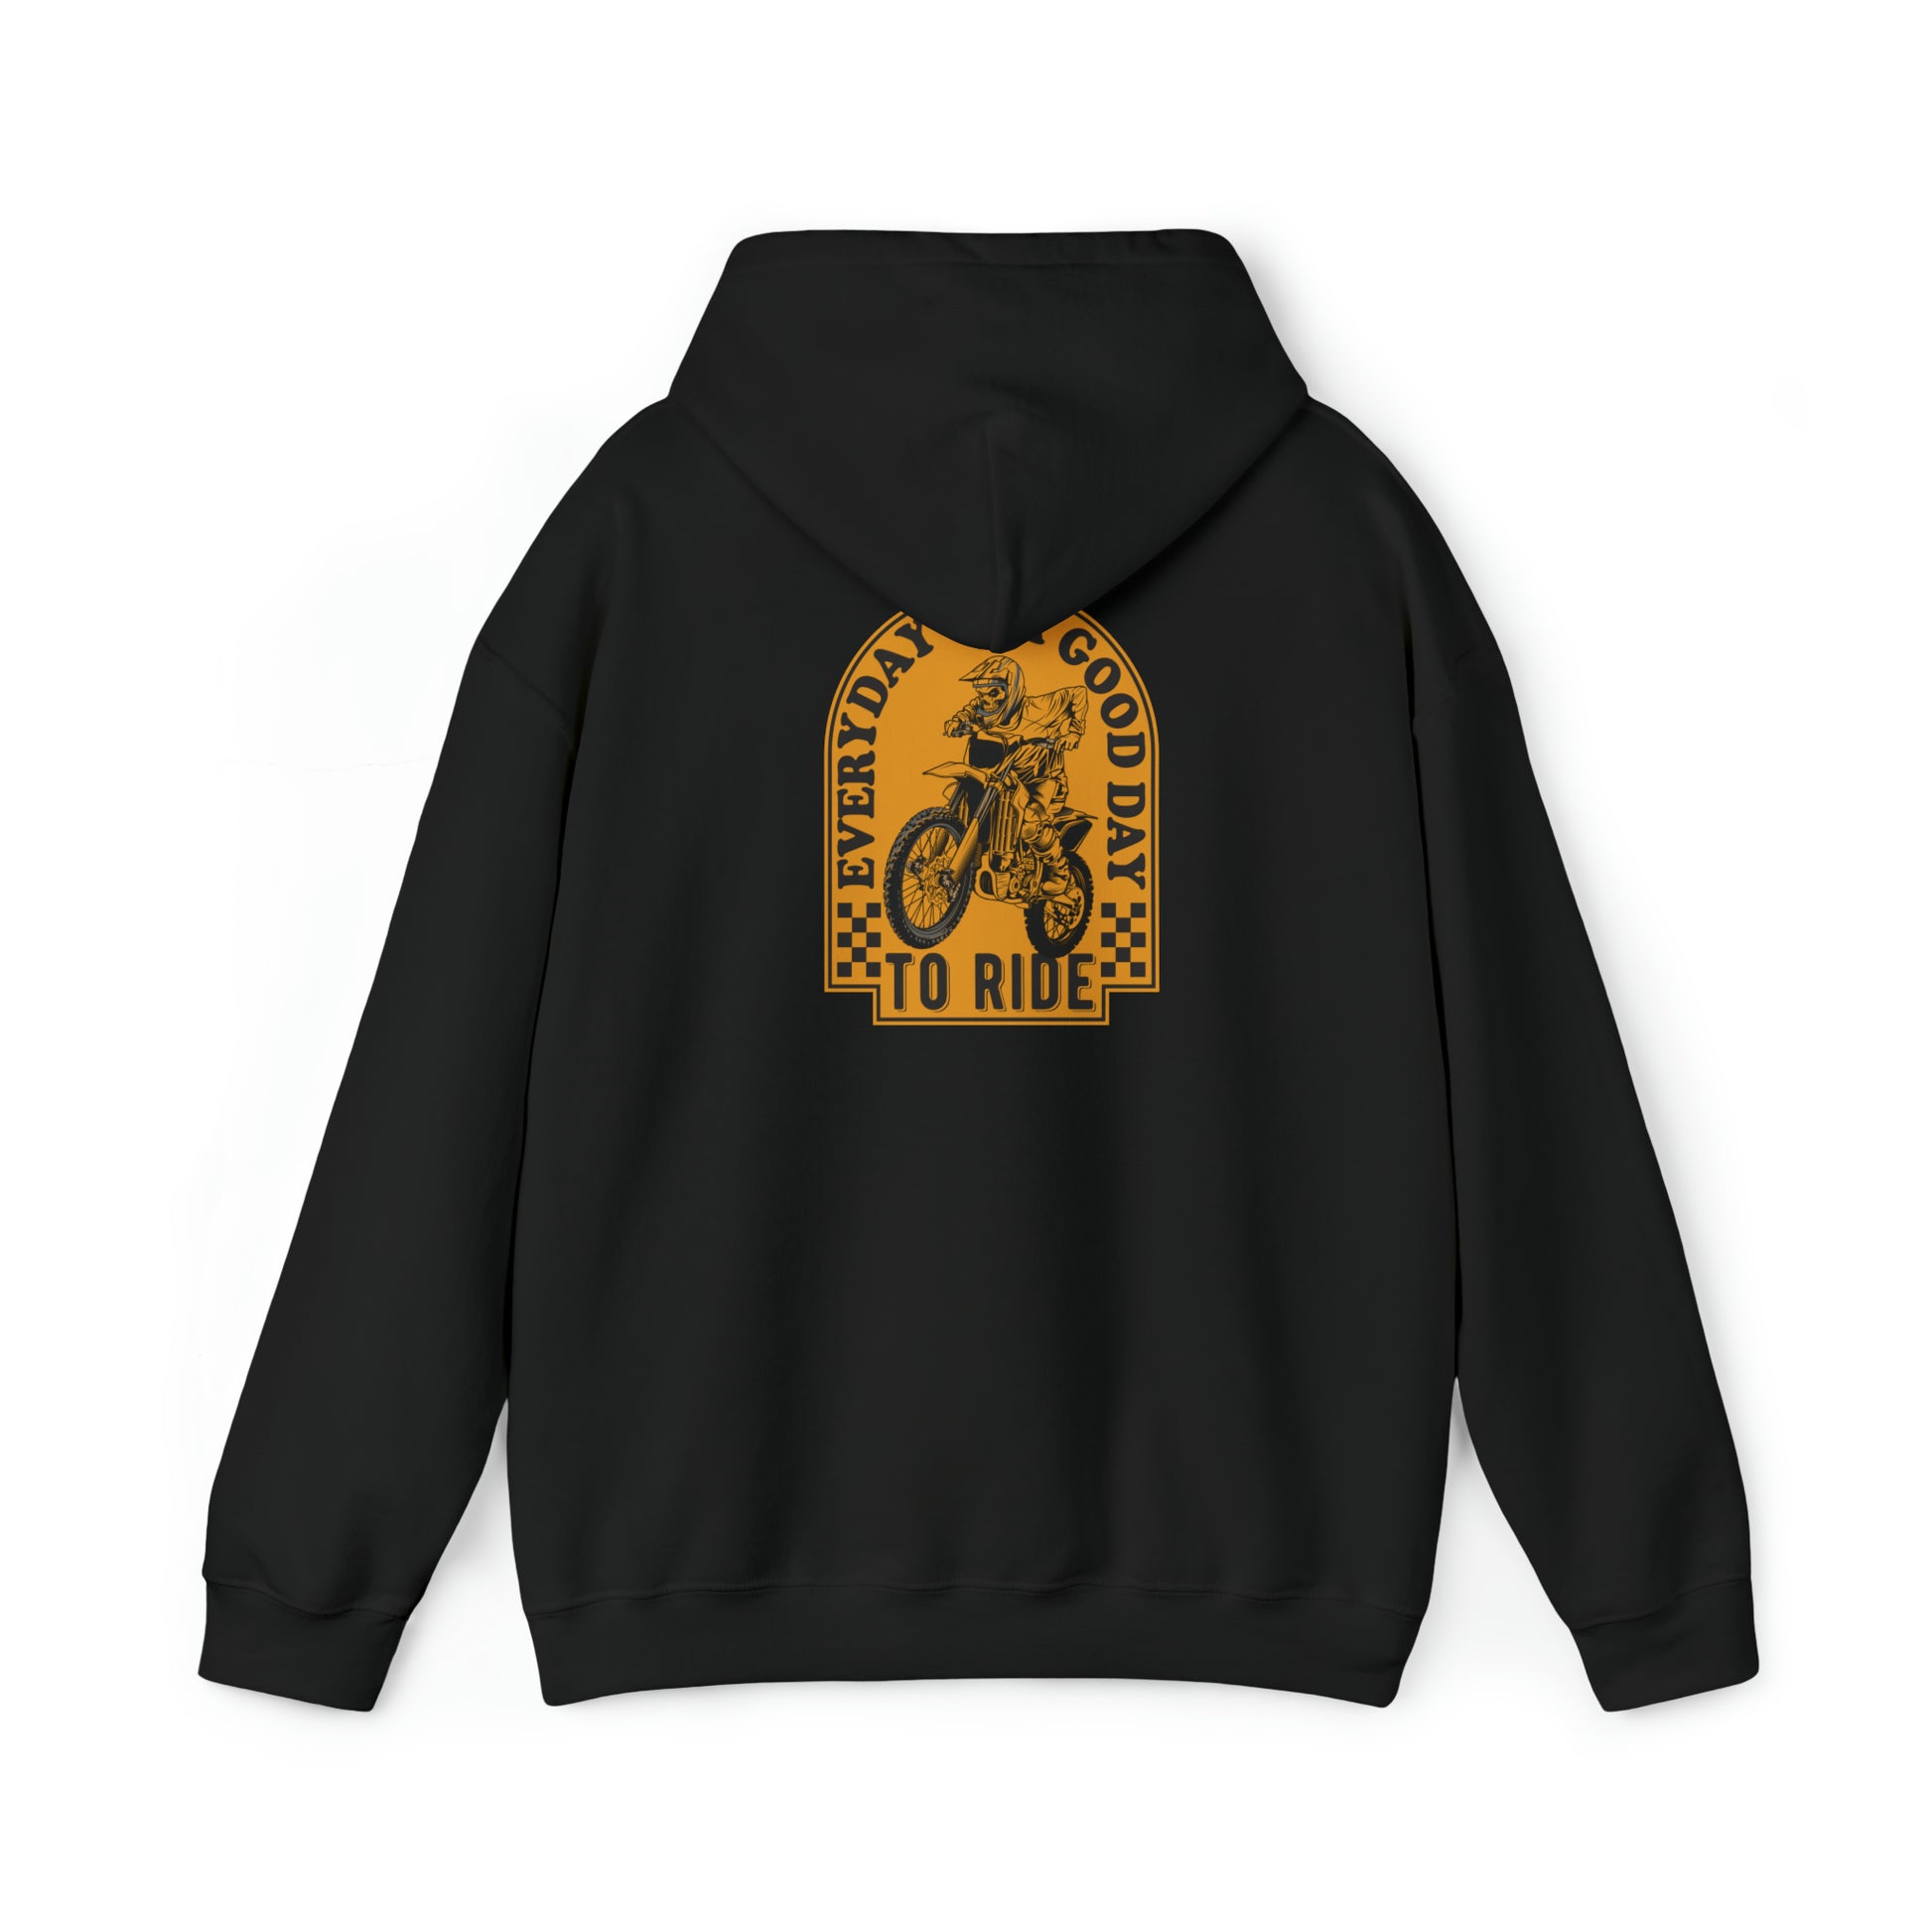 Every Day Is a Good Day Hooded Sweatshirt - MotoPros 